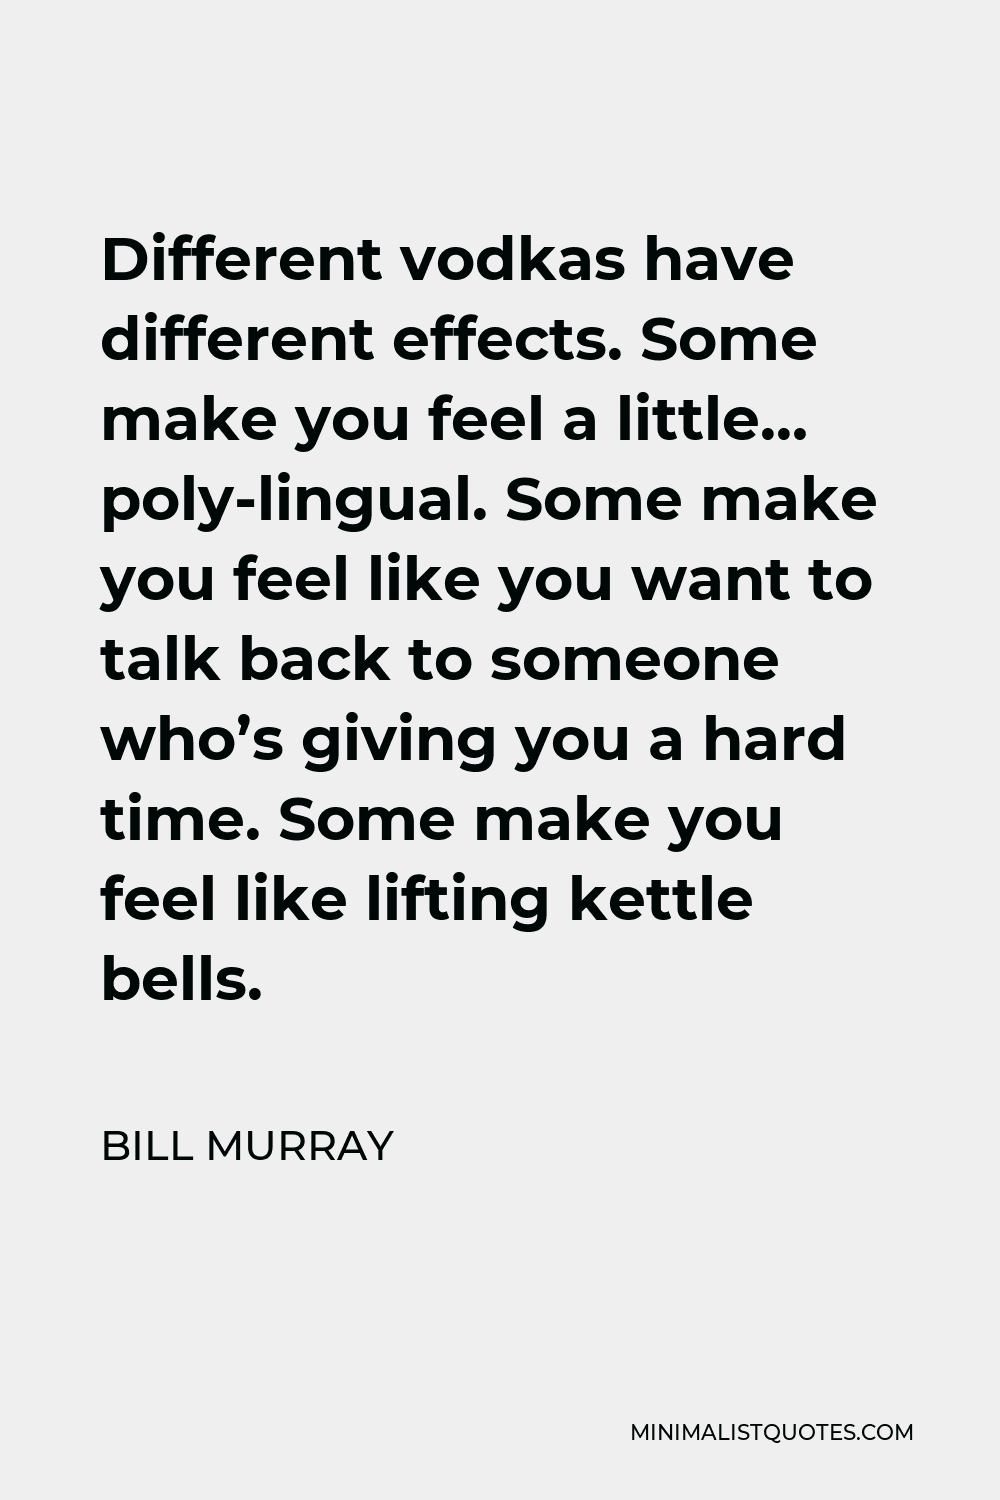 Bill Murray Quote - Different vodkas have different effects. Some make you feel a little… poly-lingual. Some make you feel like you want to talk back to someone who’s giving you a hard time. Some make you feel like lifting kettle bells.